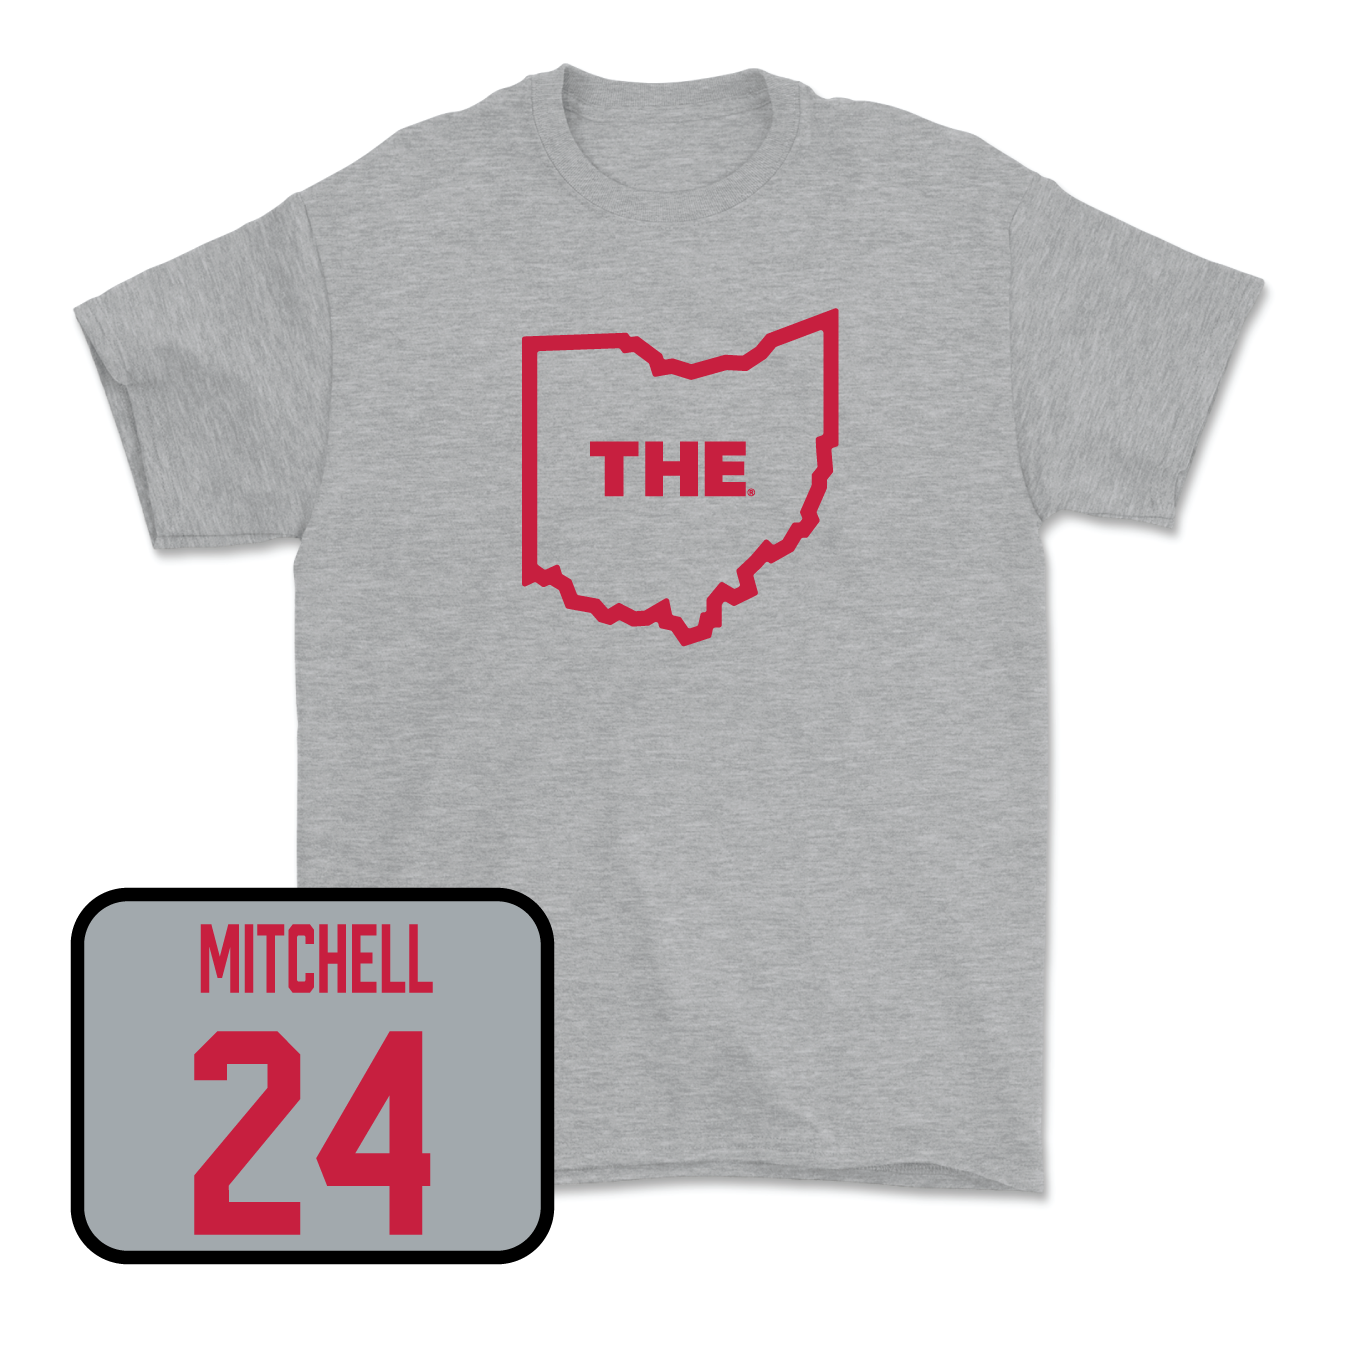 Sport Grey Men's Lacrosse The Tee 2 Youth Small / Connor Mitchell | #24